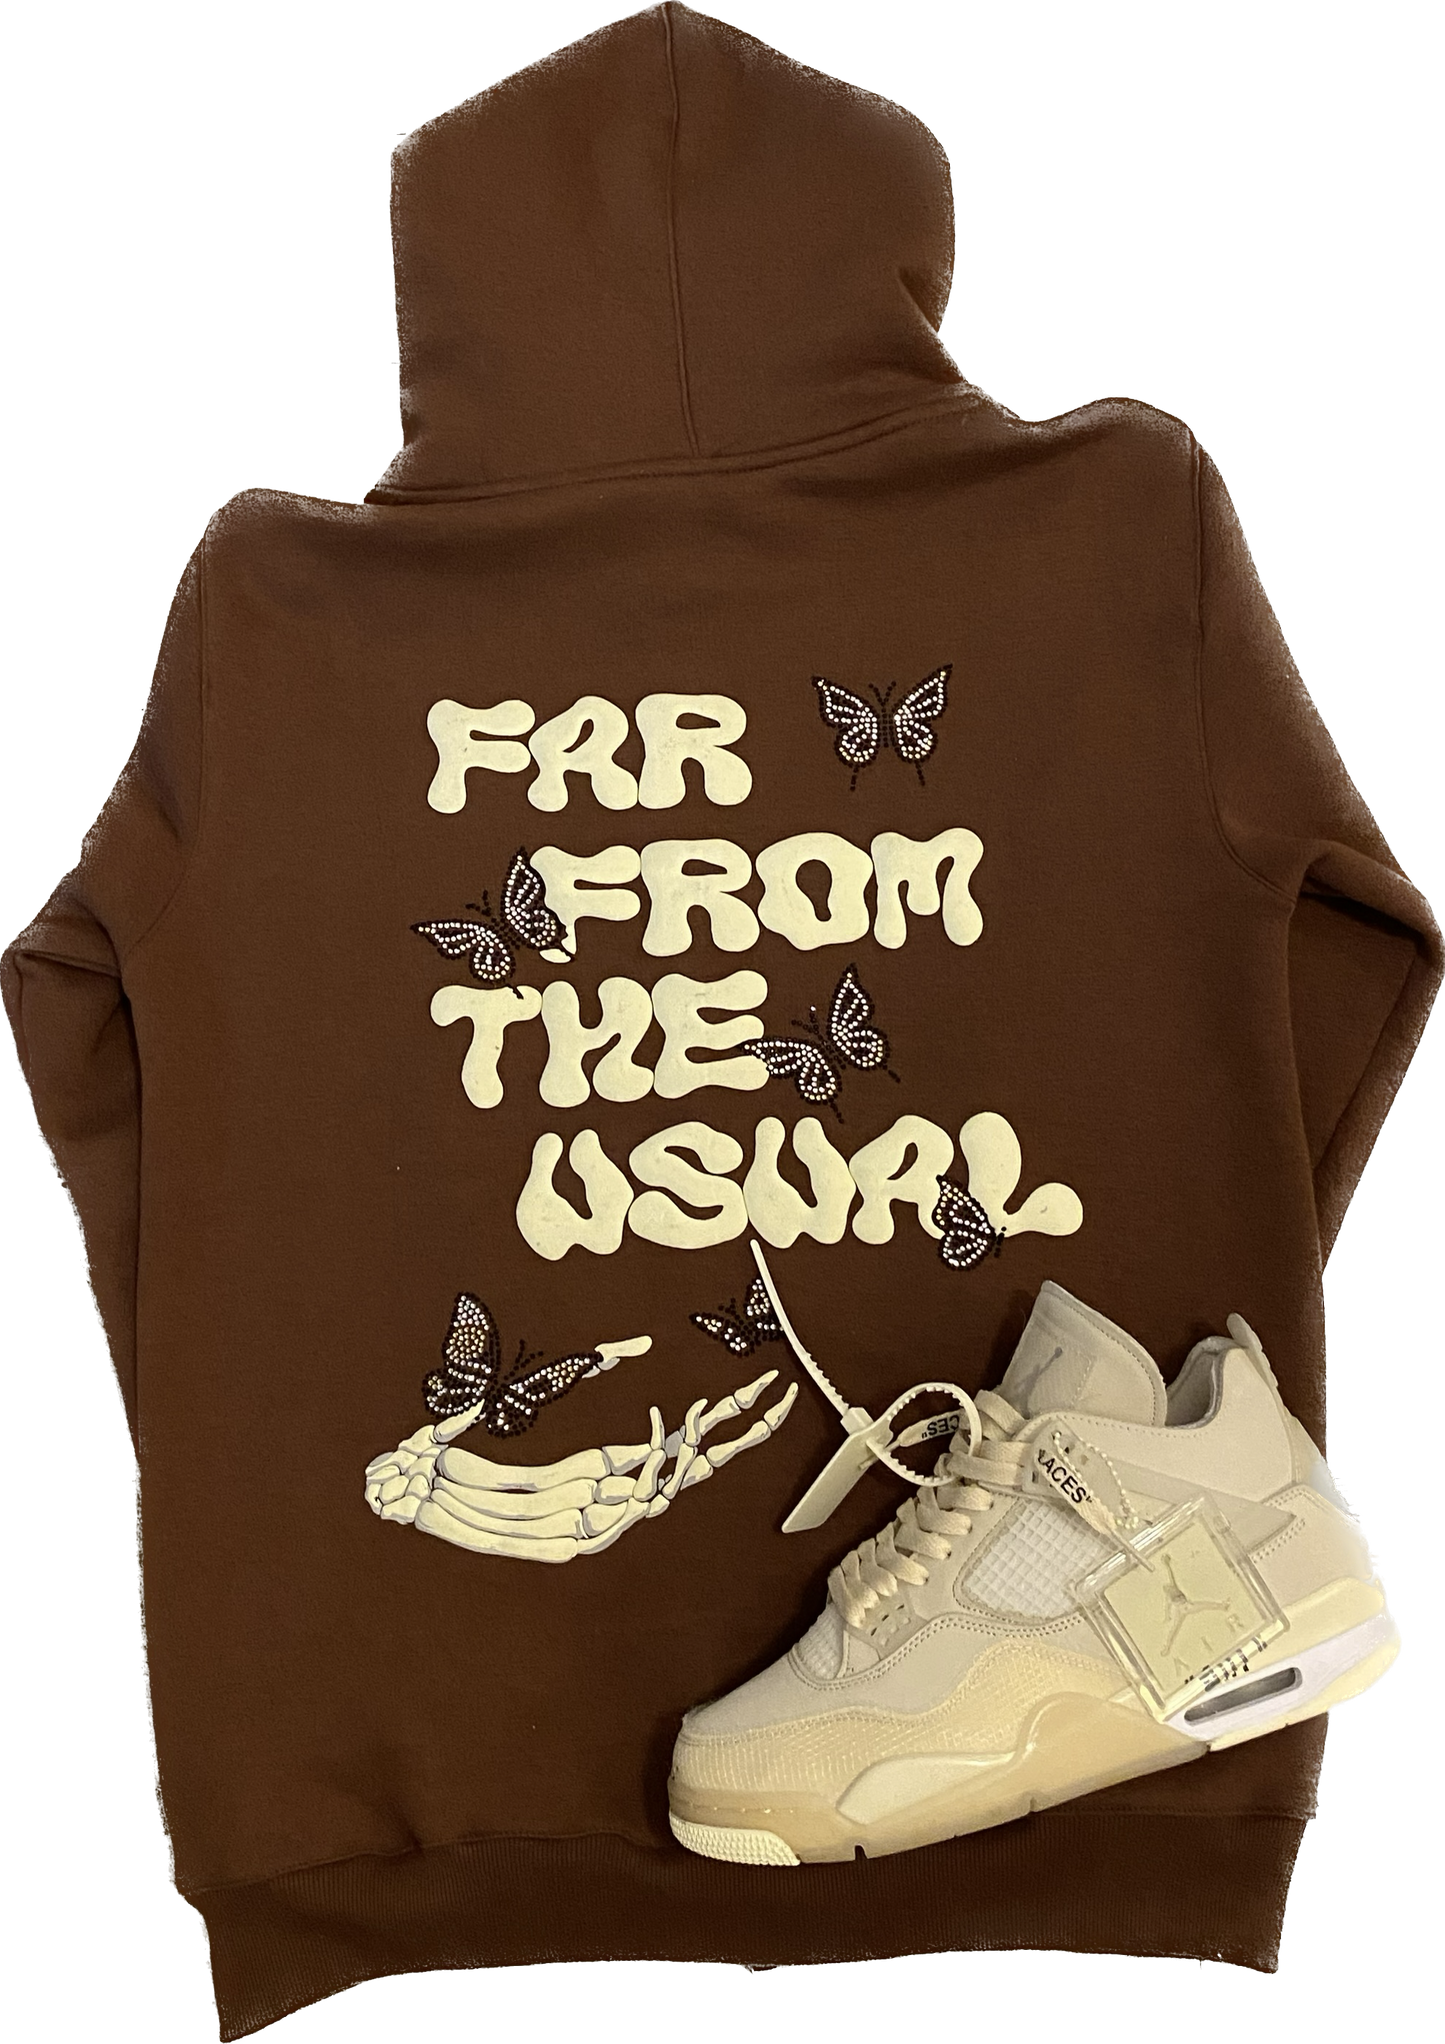 INFLUENTIAL “FAR FROM THE USUAL” MOCHA/CREAM ZIP-UP